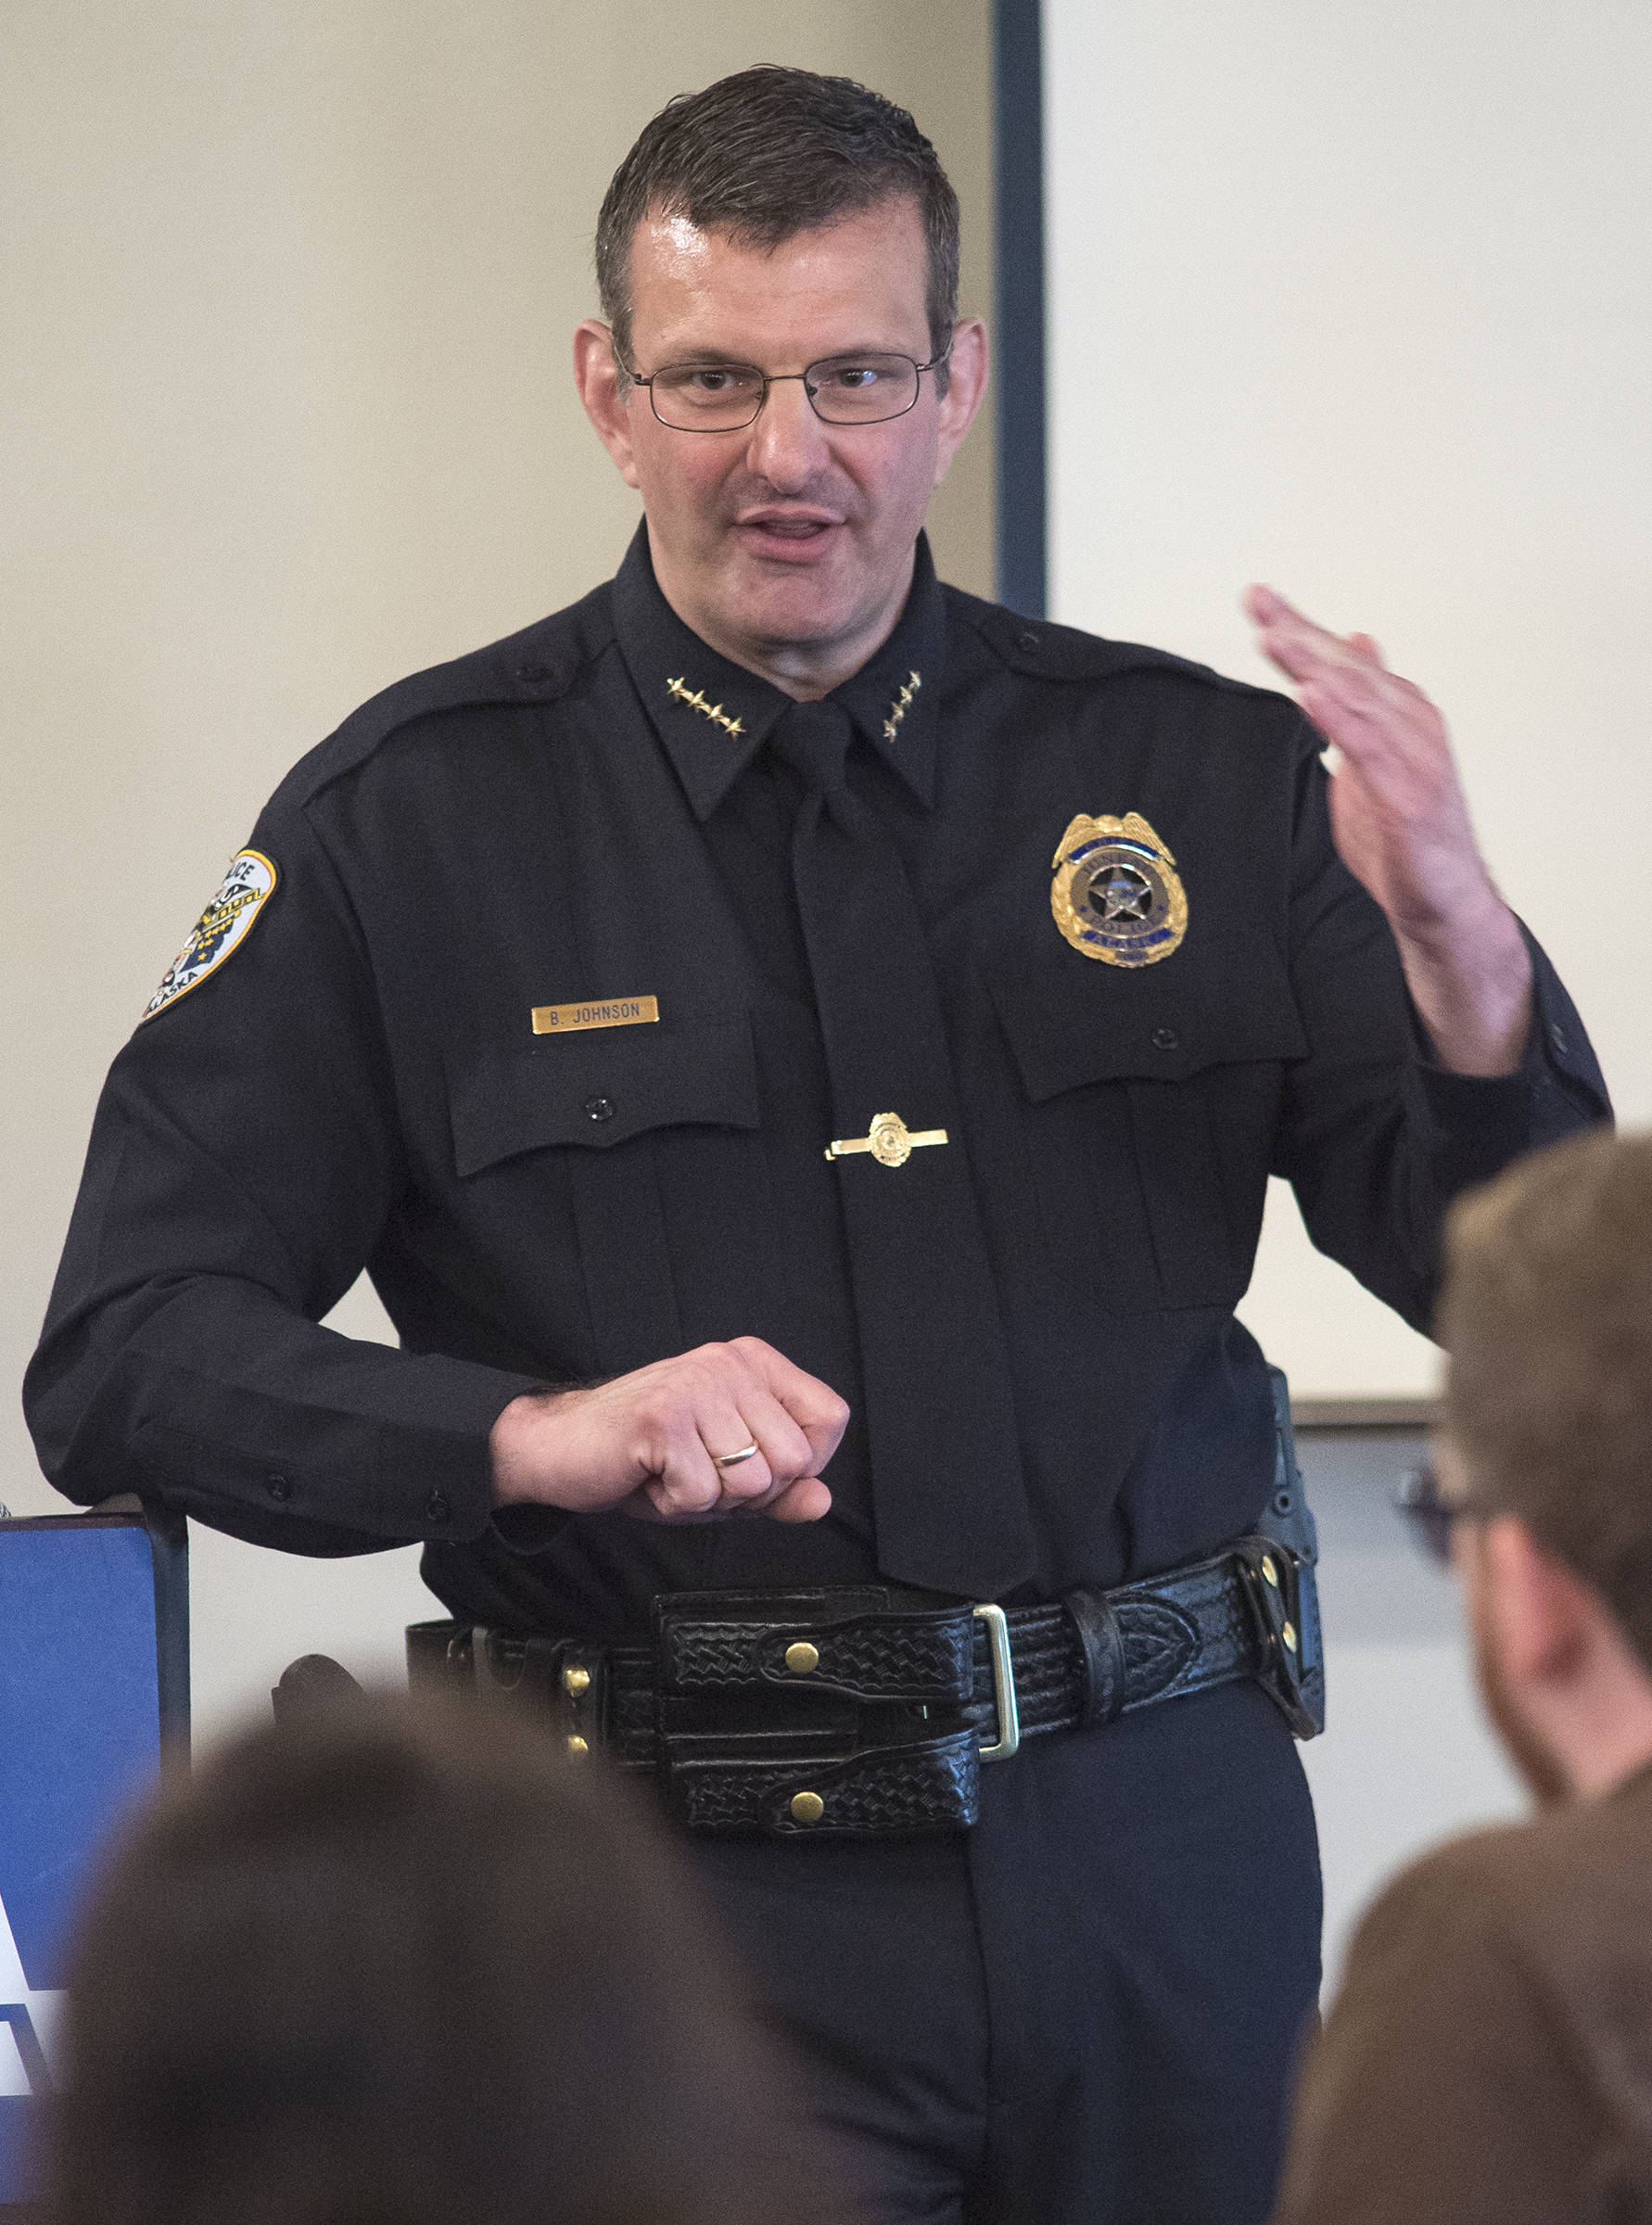 Retiring Chief of Police Bryce Johnson speaks to the Juneau Chamber of Commerce at its weekly luncheon at the Moose Lodge on Thursday, July 6, 2017. (Michael Penn | Juneau Empire)